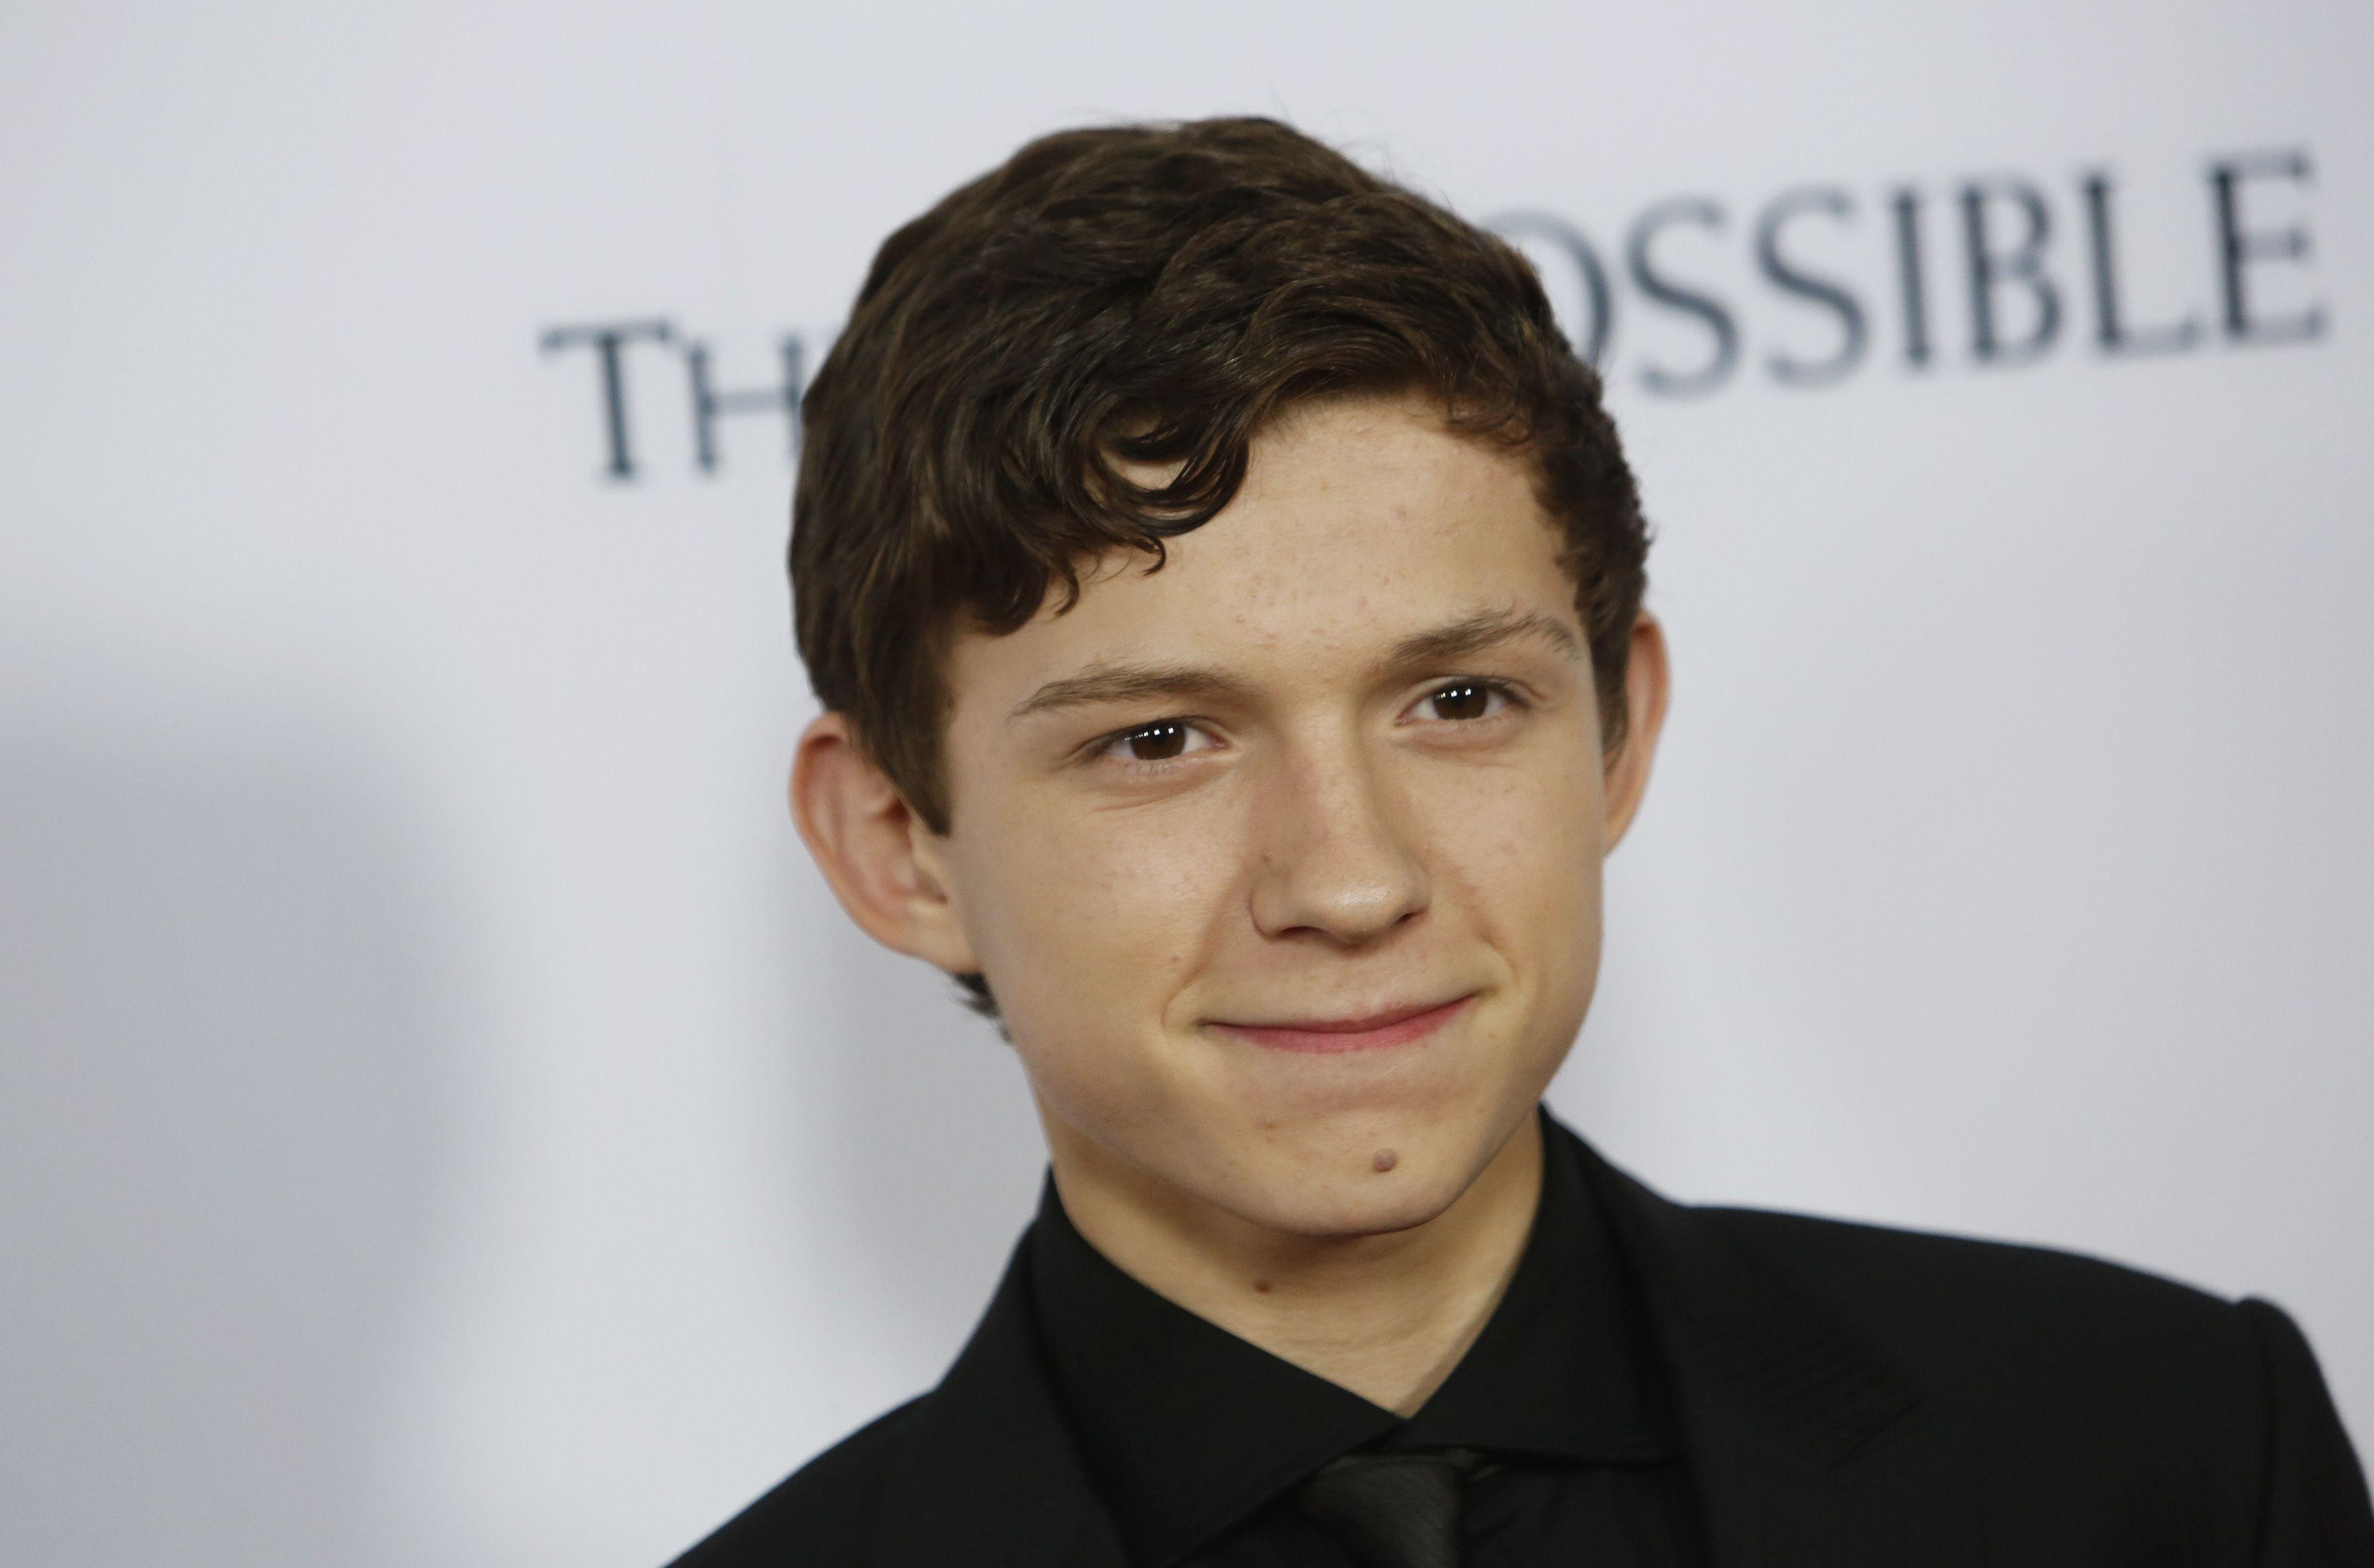 Tom Holland Wallpaper High Resolution and Quality Download